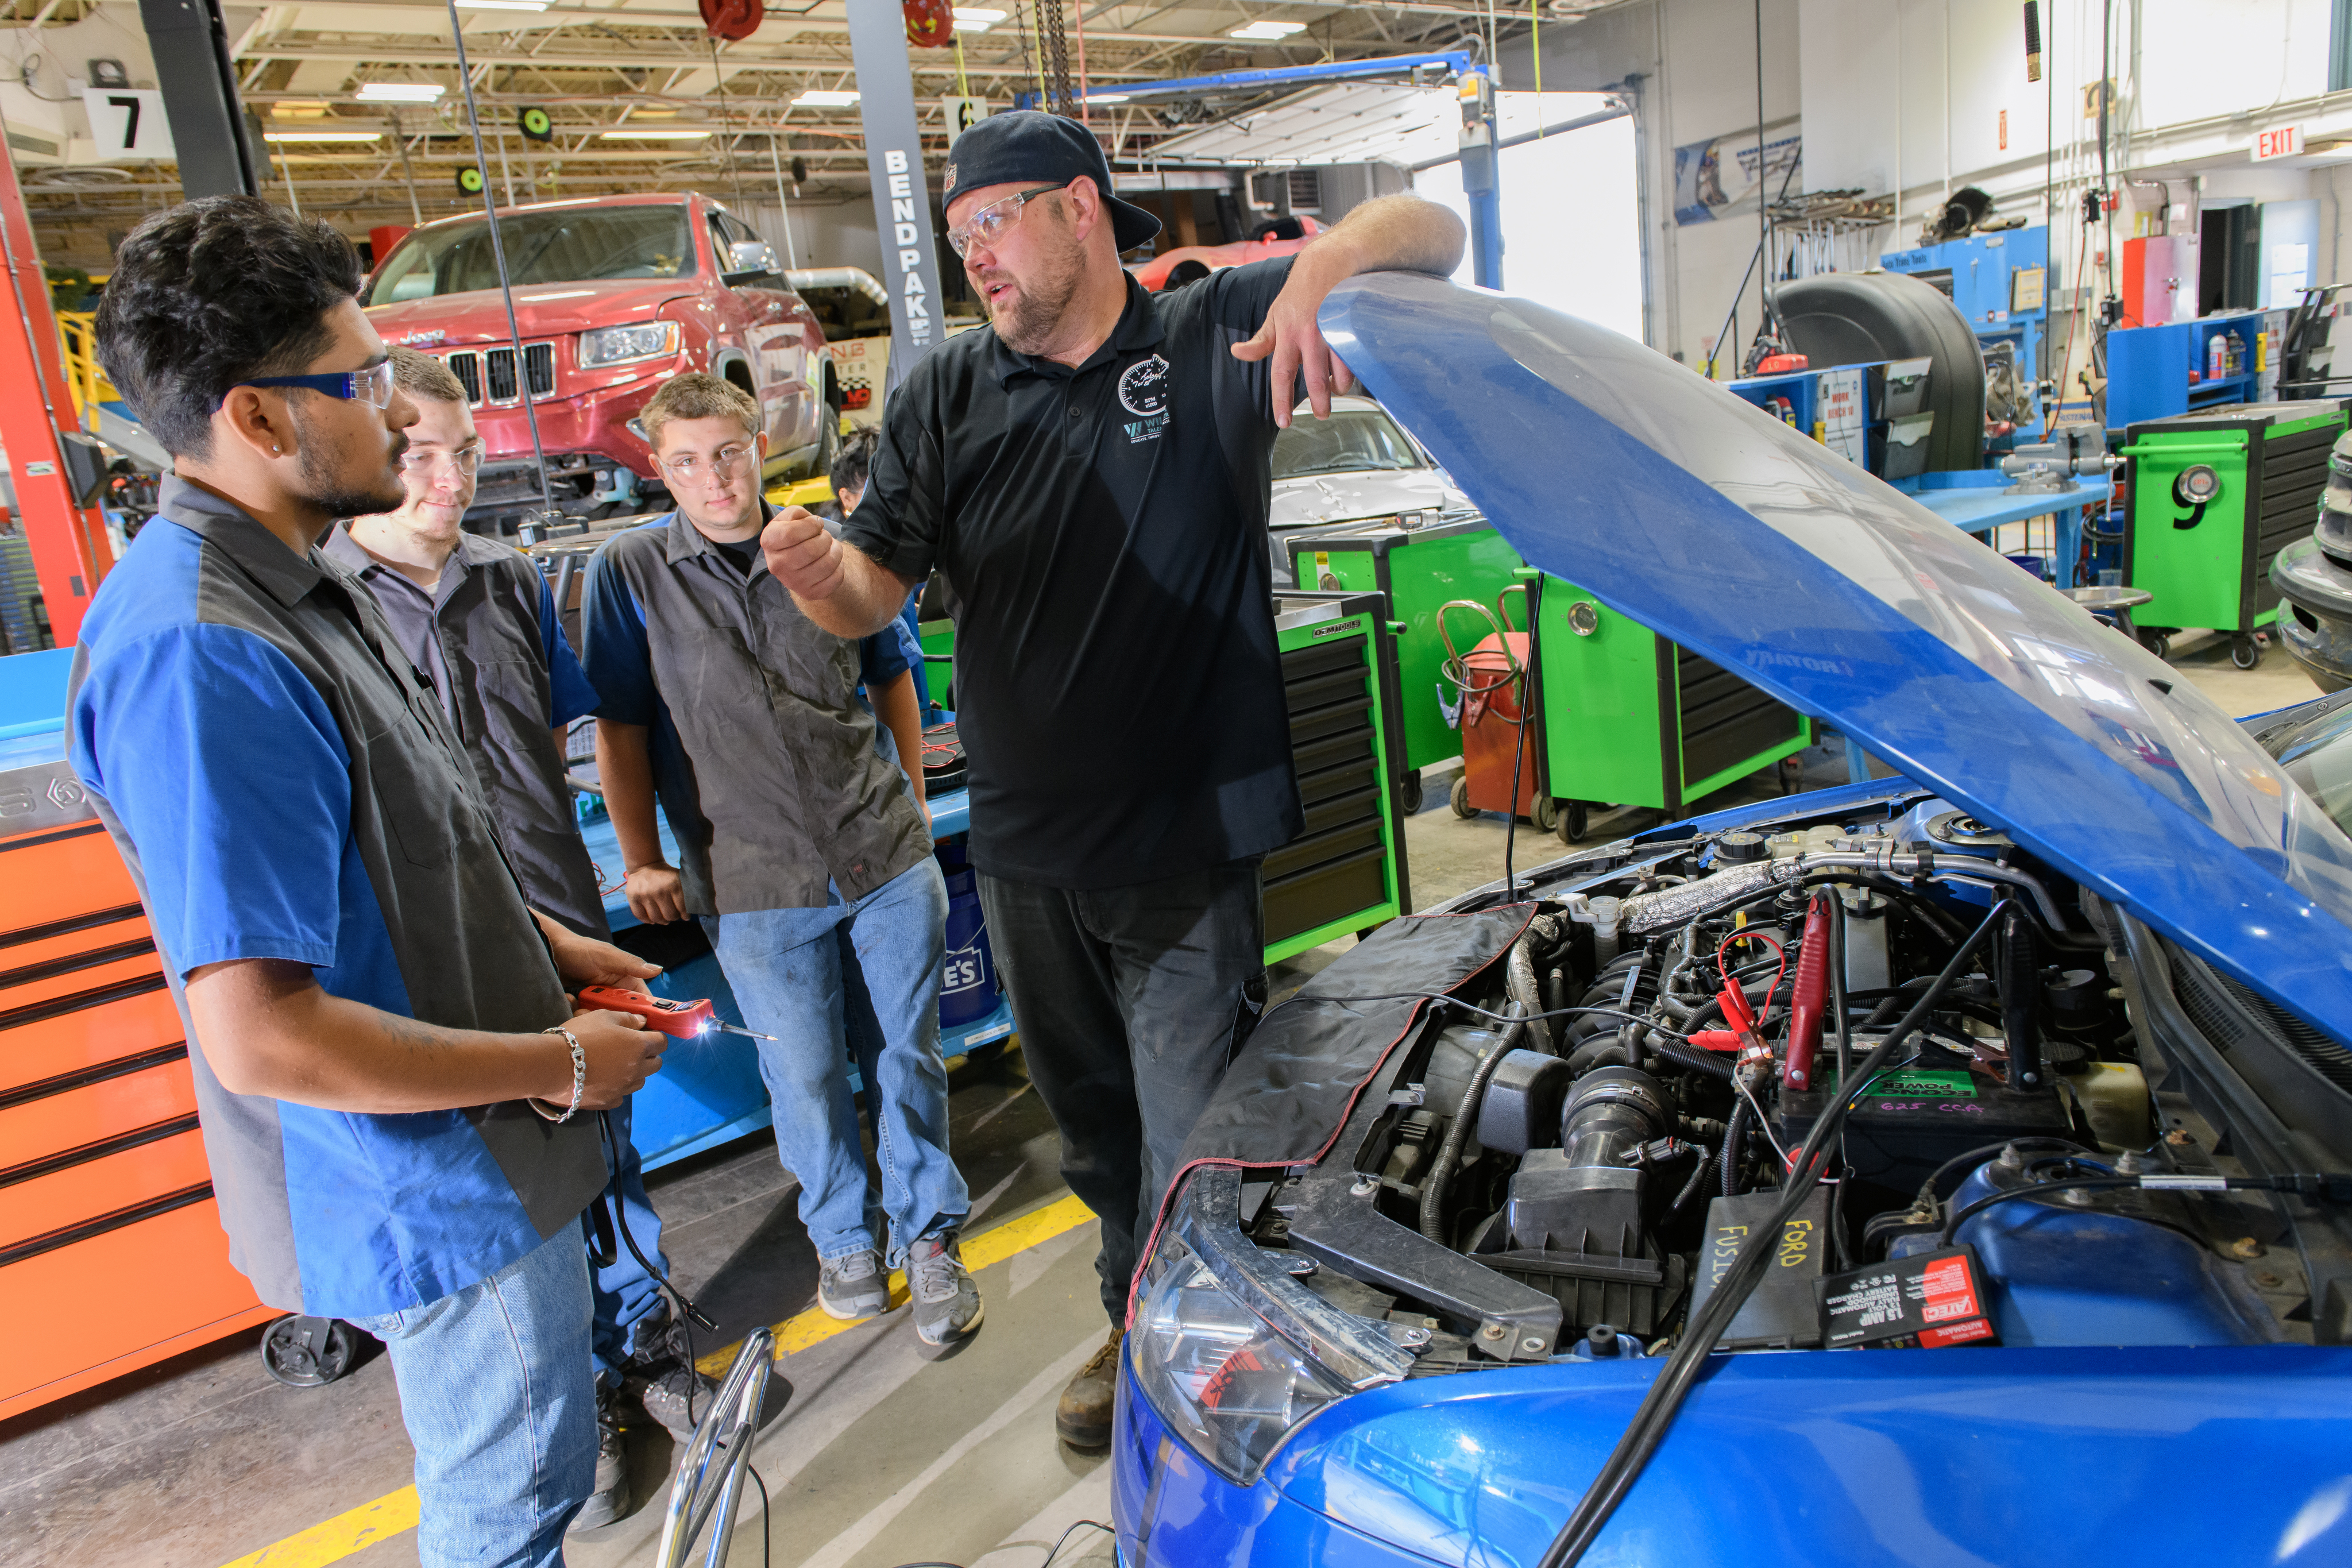 Automotive Technology instructor discusses with 2 students what they need to do to fix the blue car.